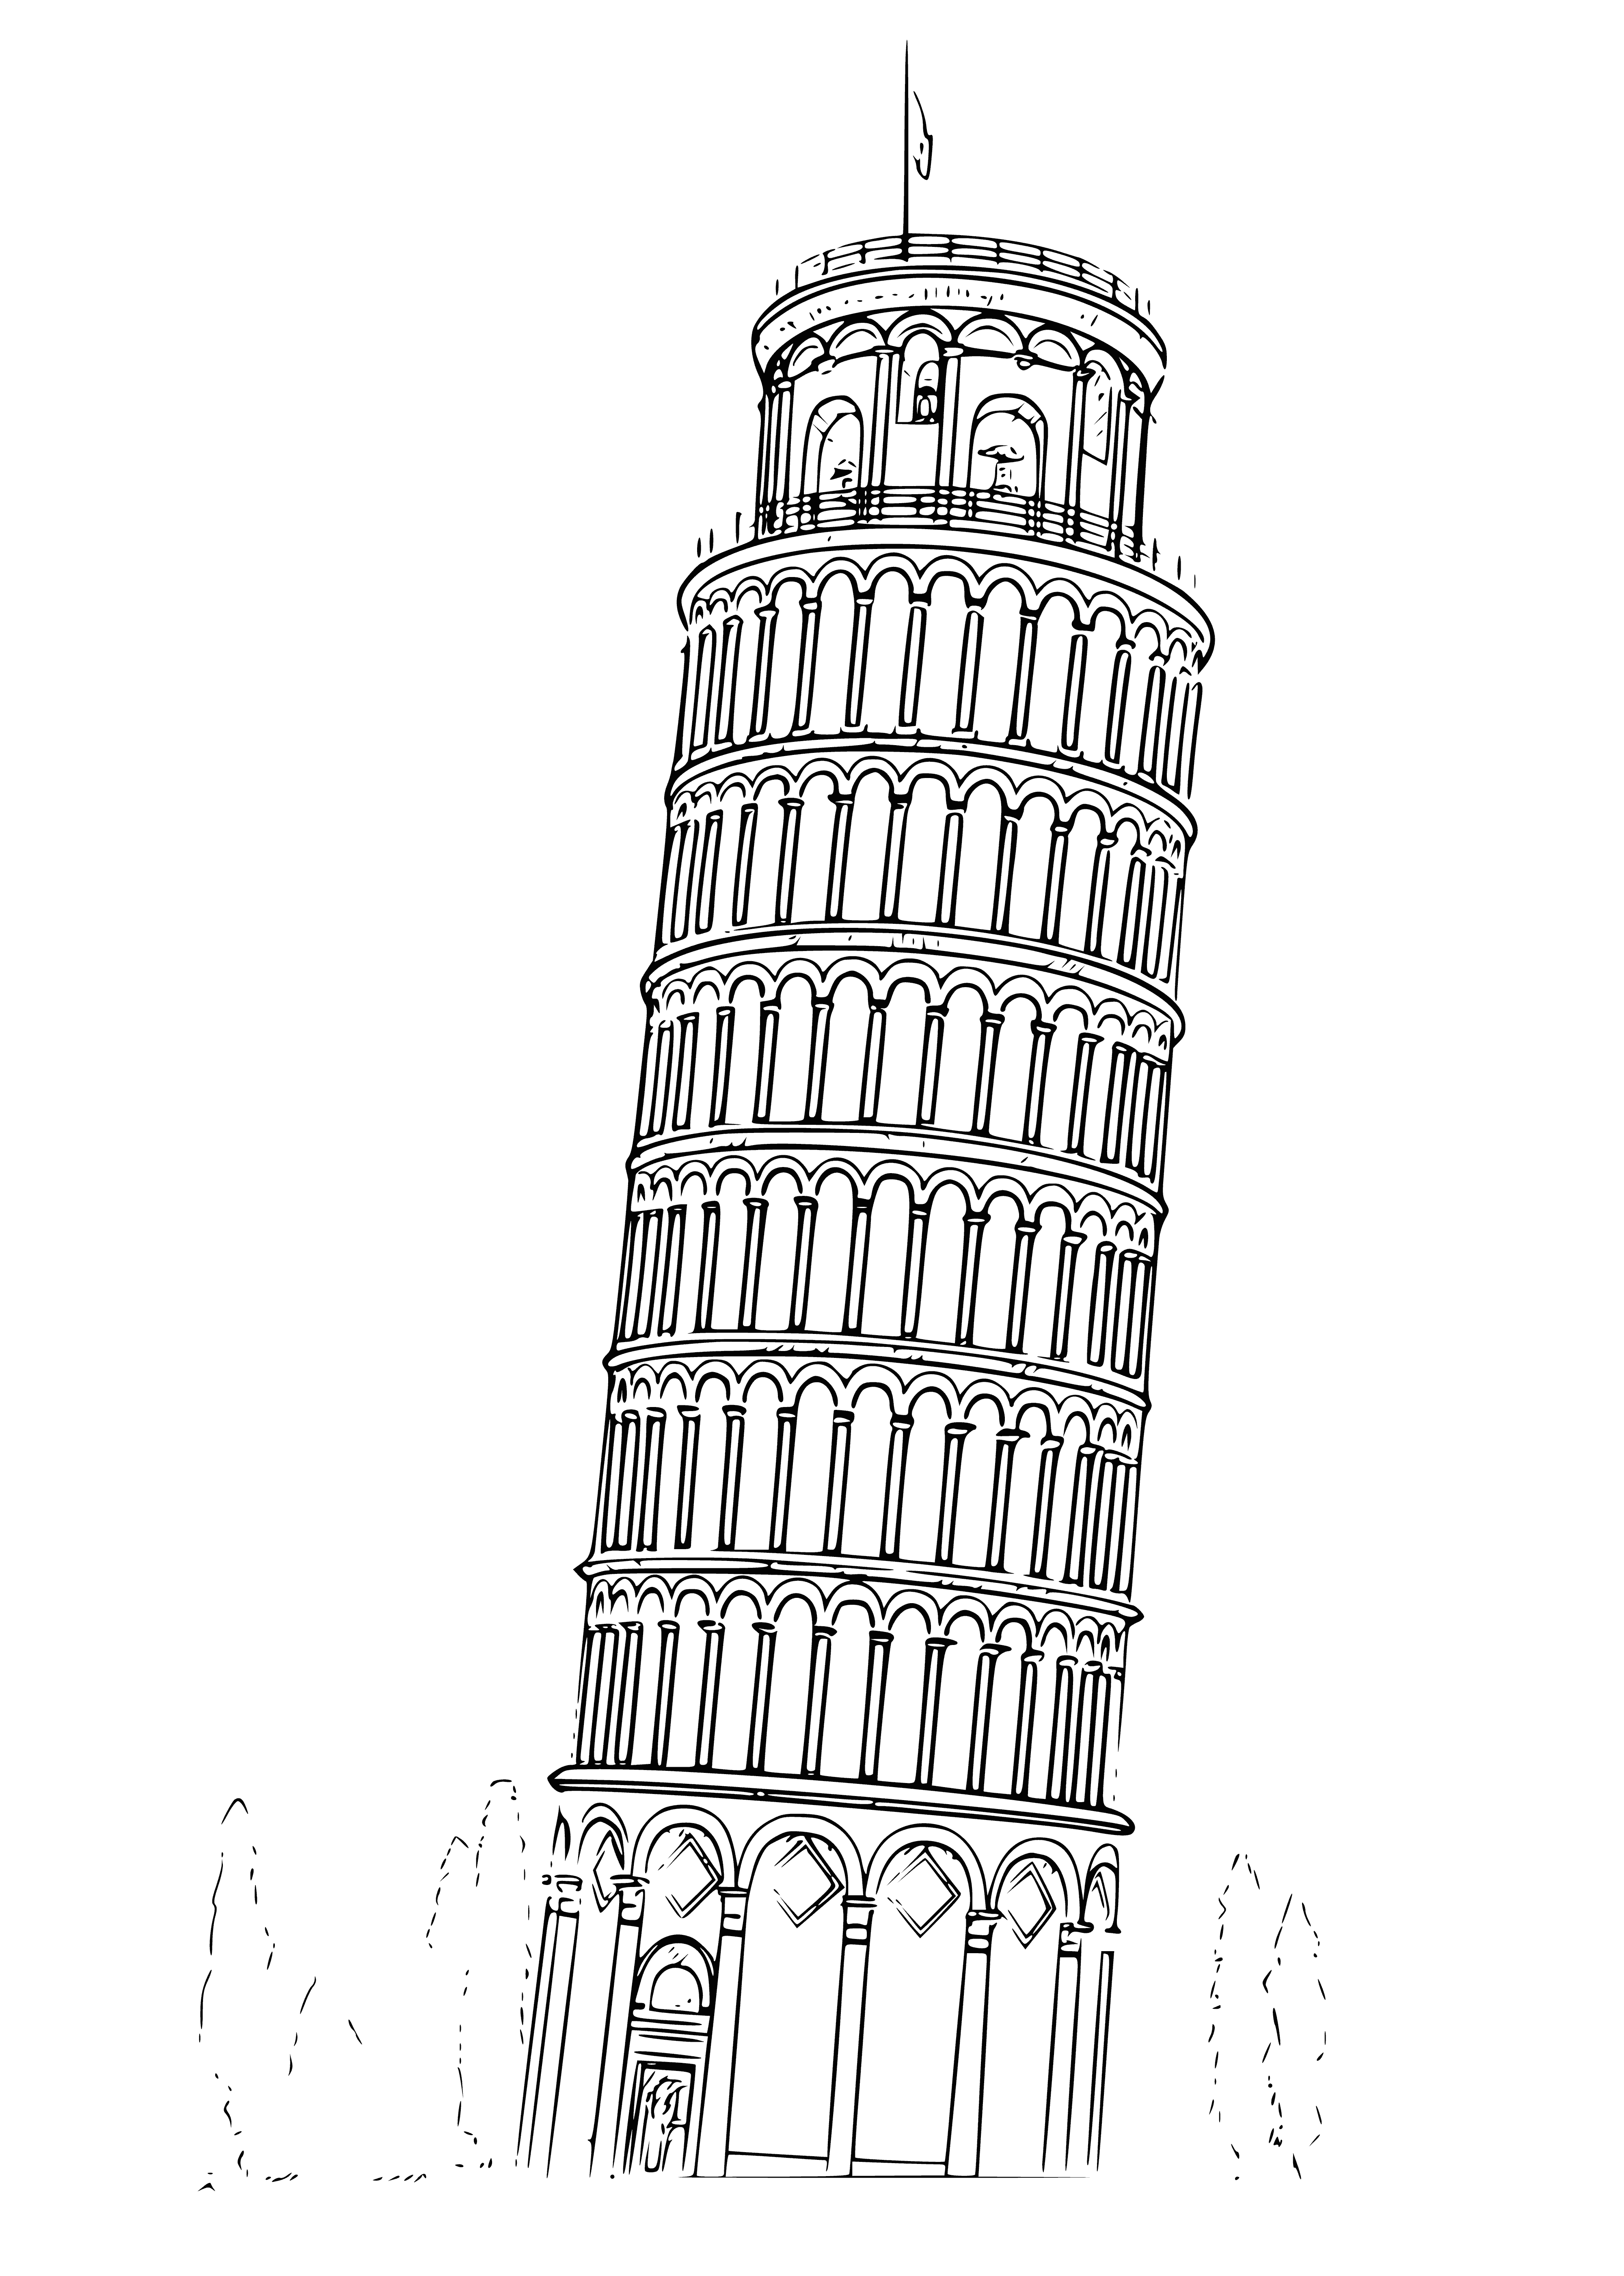 coloring page: The Leaning Tower of Pisa is a famous landmark in Italy. It is an iconic marble tower & one of the seven wonders of the world.